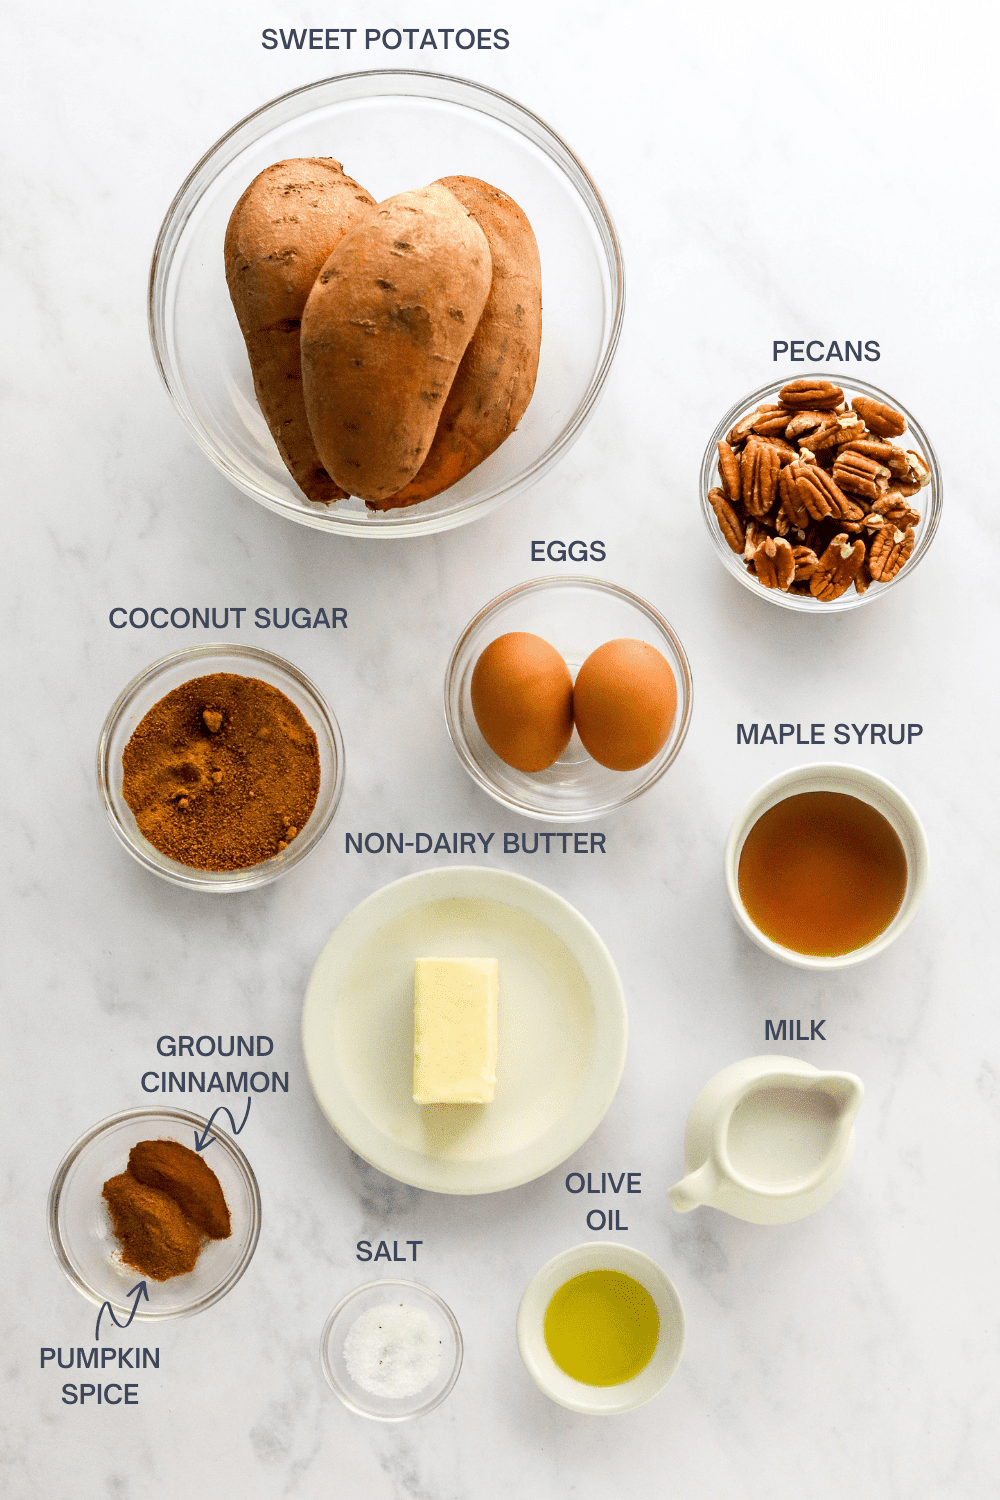 Bowl of whole sweet potatoes, bowl of pecans, bowl of coconut sugar, bowl of whole eggs, bowl with maple syrup and a plate with a stick butter on a white marble surface. 